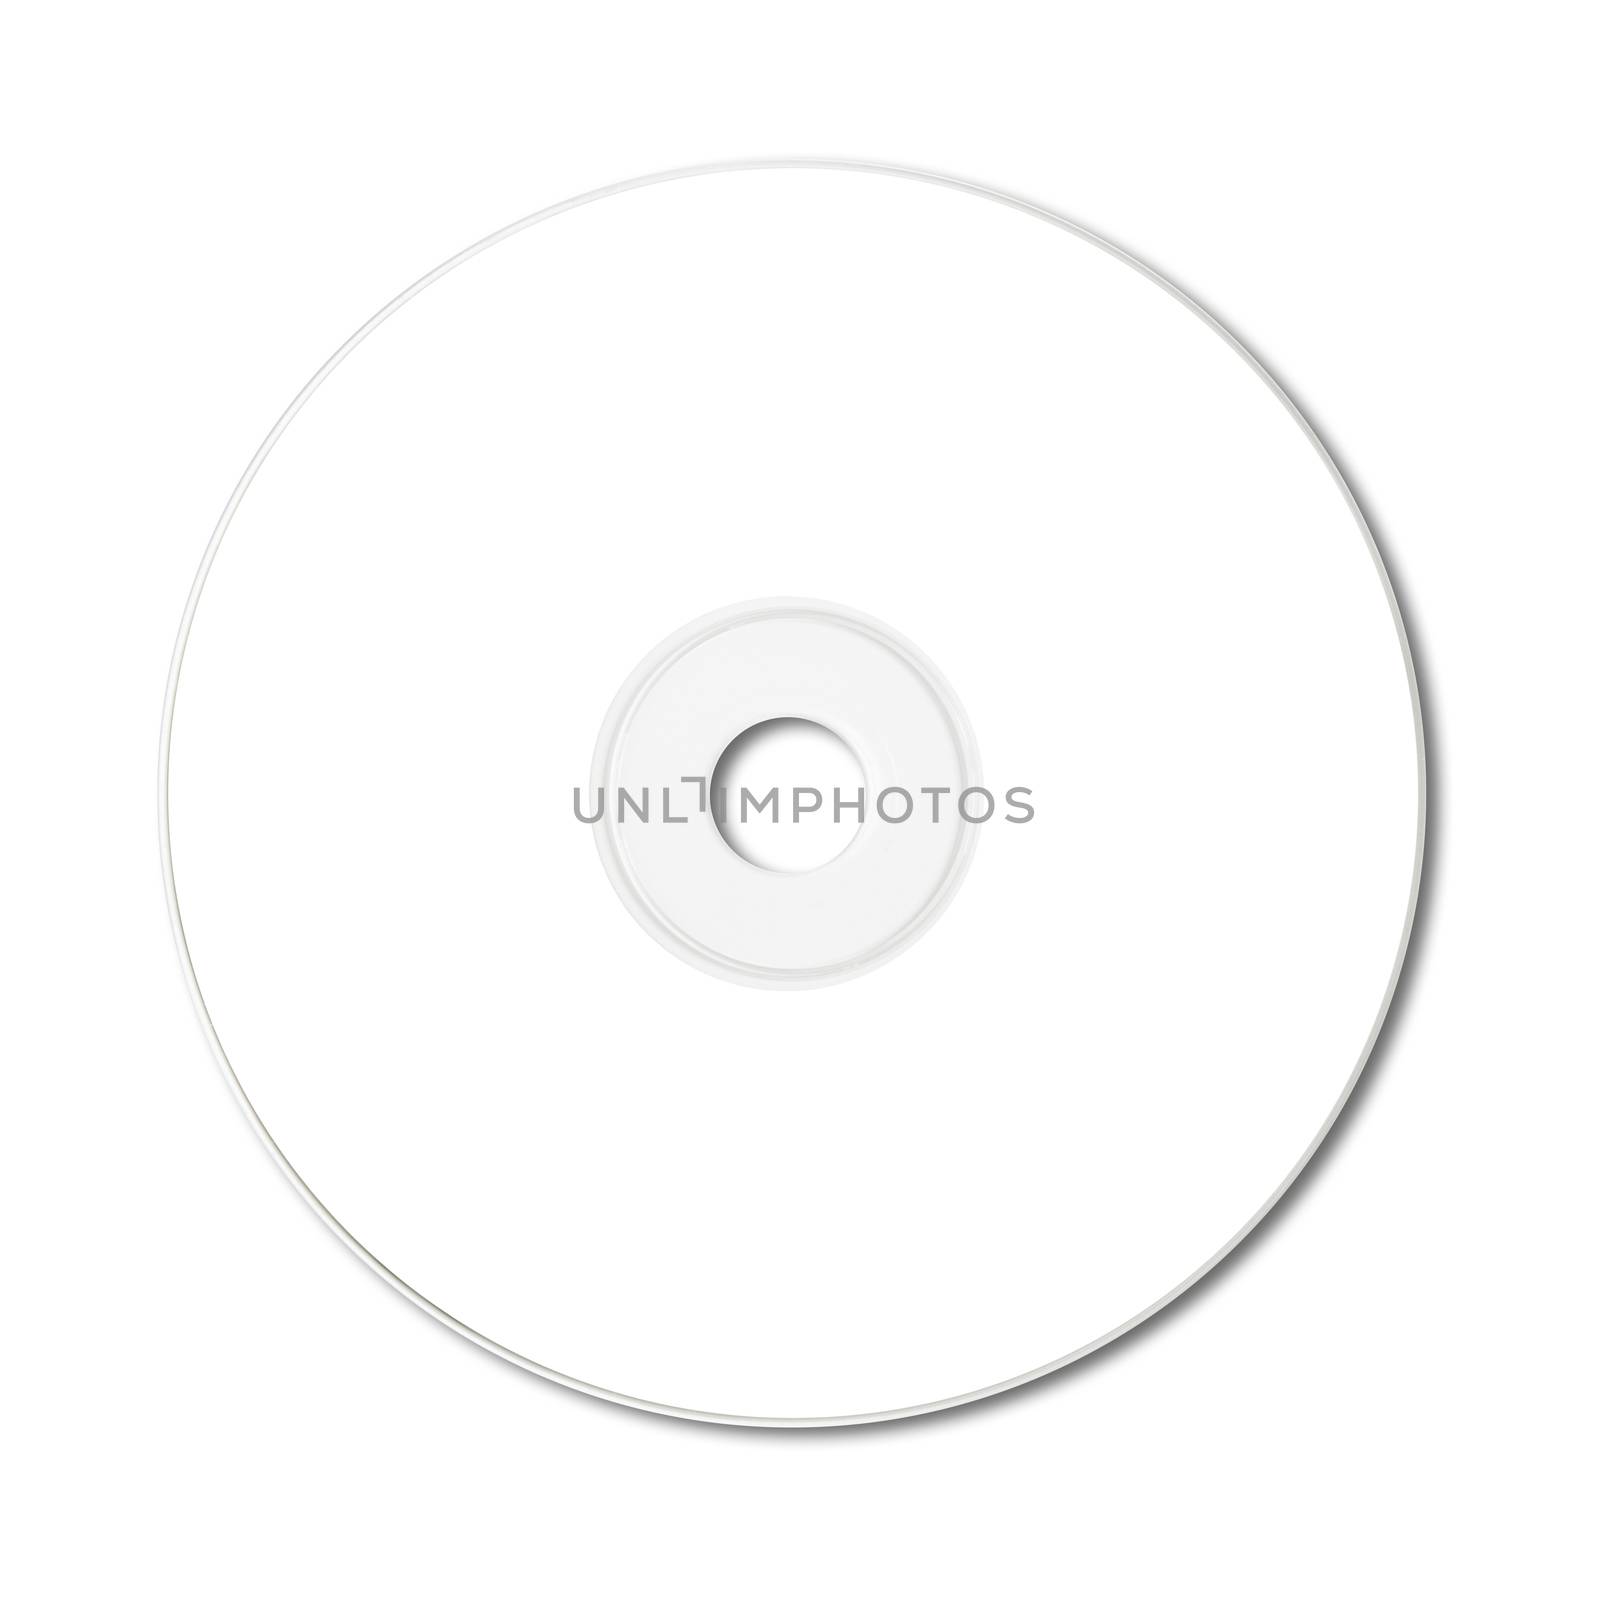 White CD - DVD label mockup template isolated